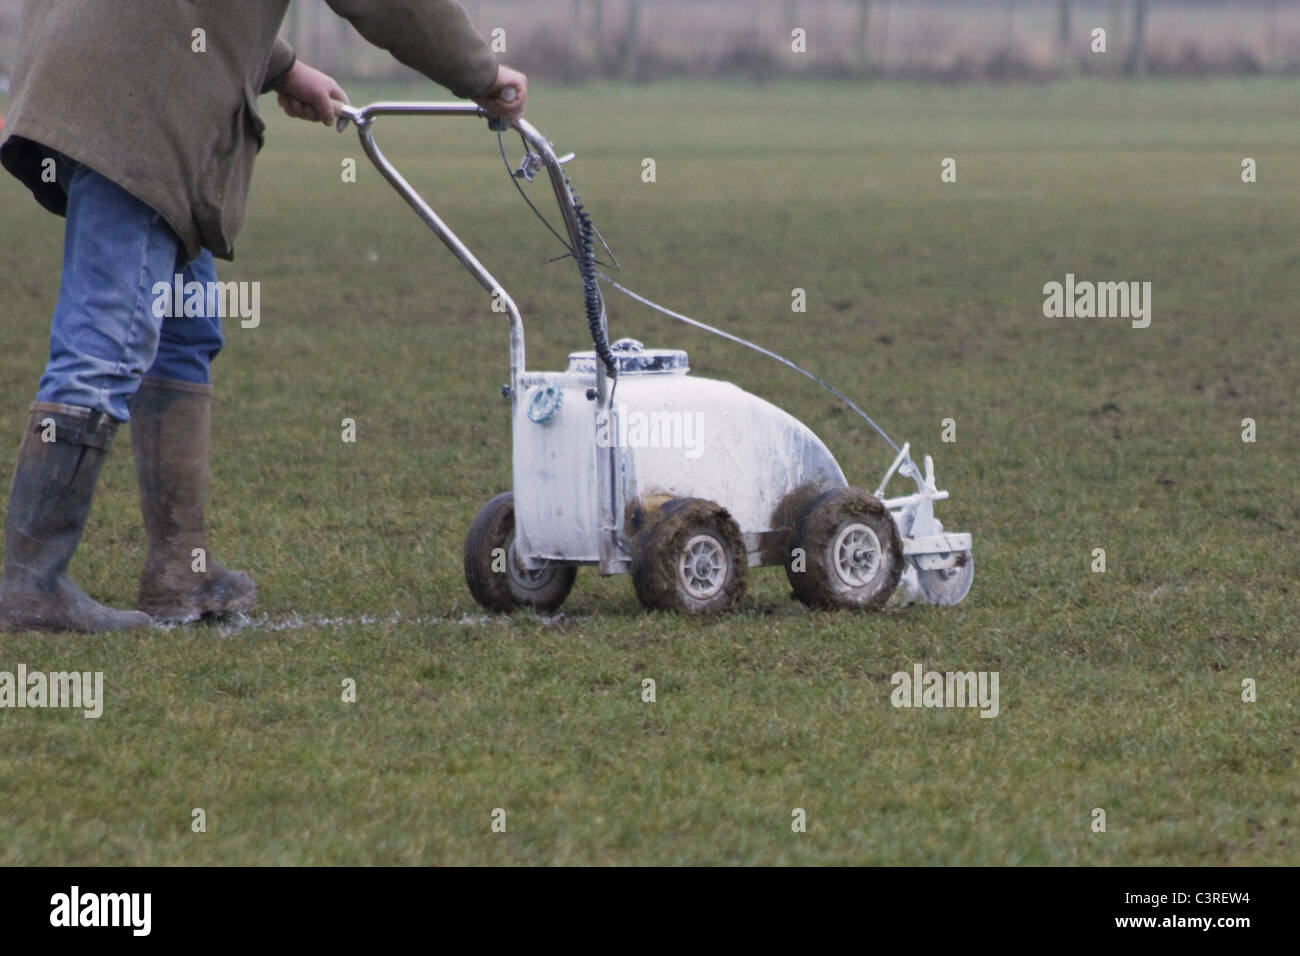 Groundsman painting white lines on football pitch using a push along machine Stock Photo